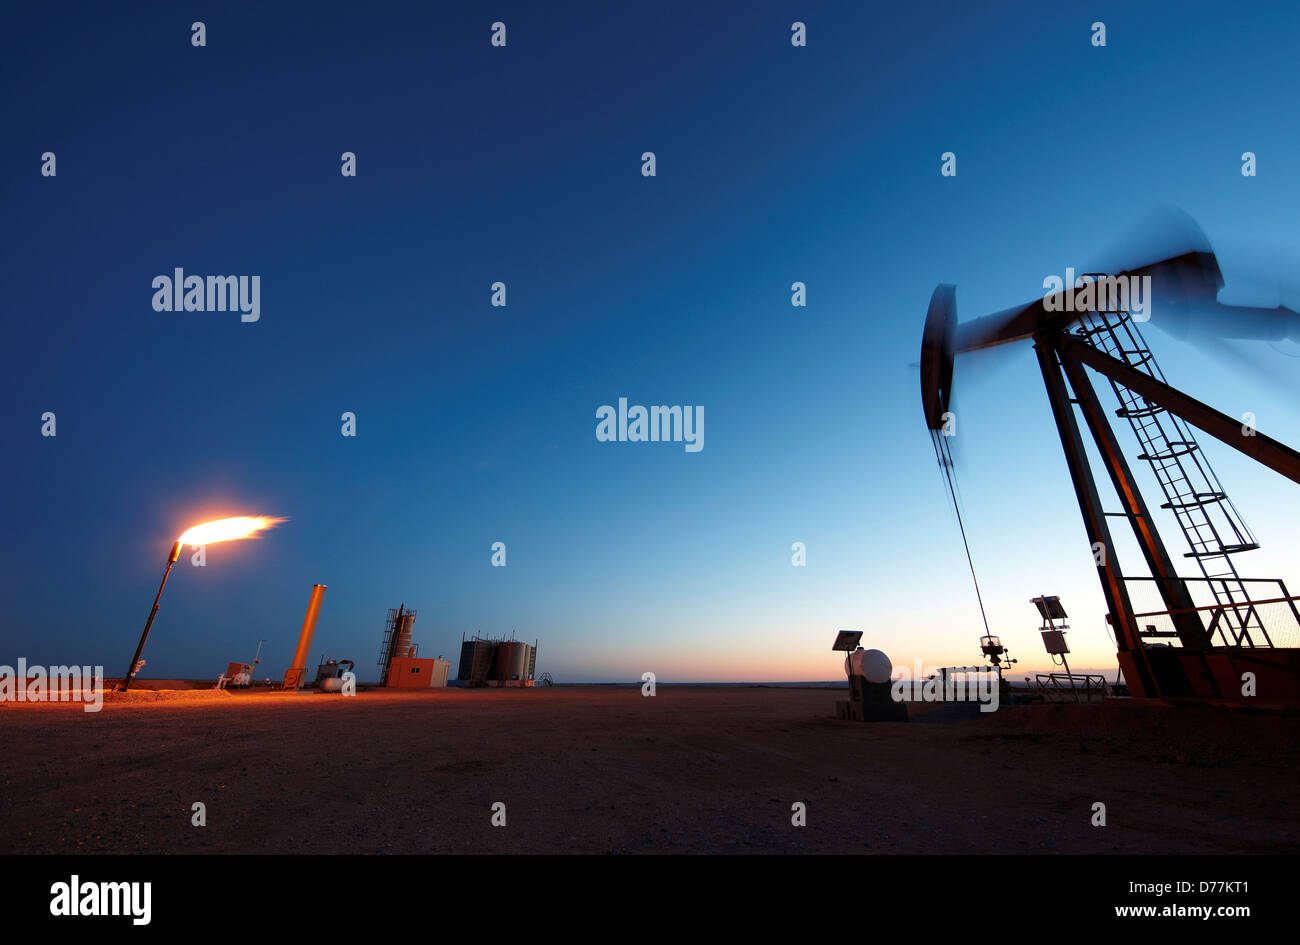 Oil well pumpjack pump jack gas flare flare stack eastern plains Colorado dusk view Oil well developed hydraulic fracturing Stock Photo